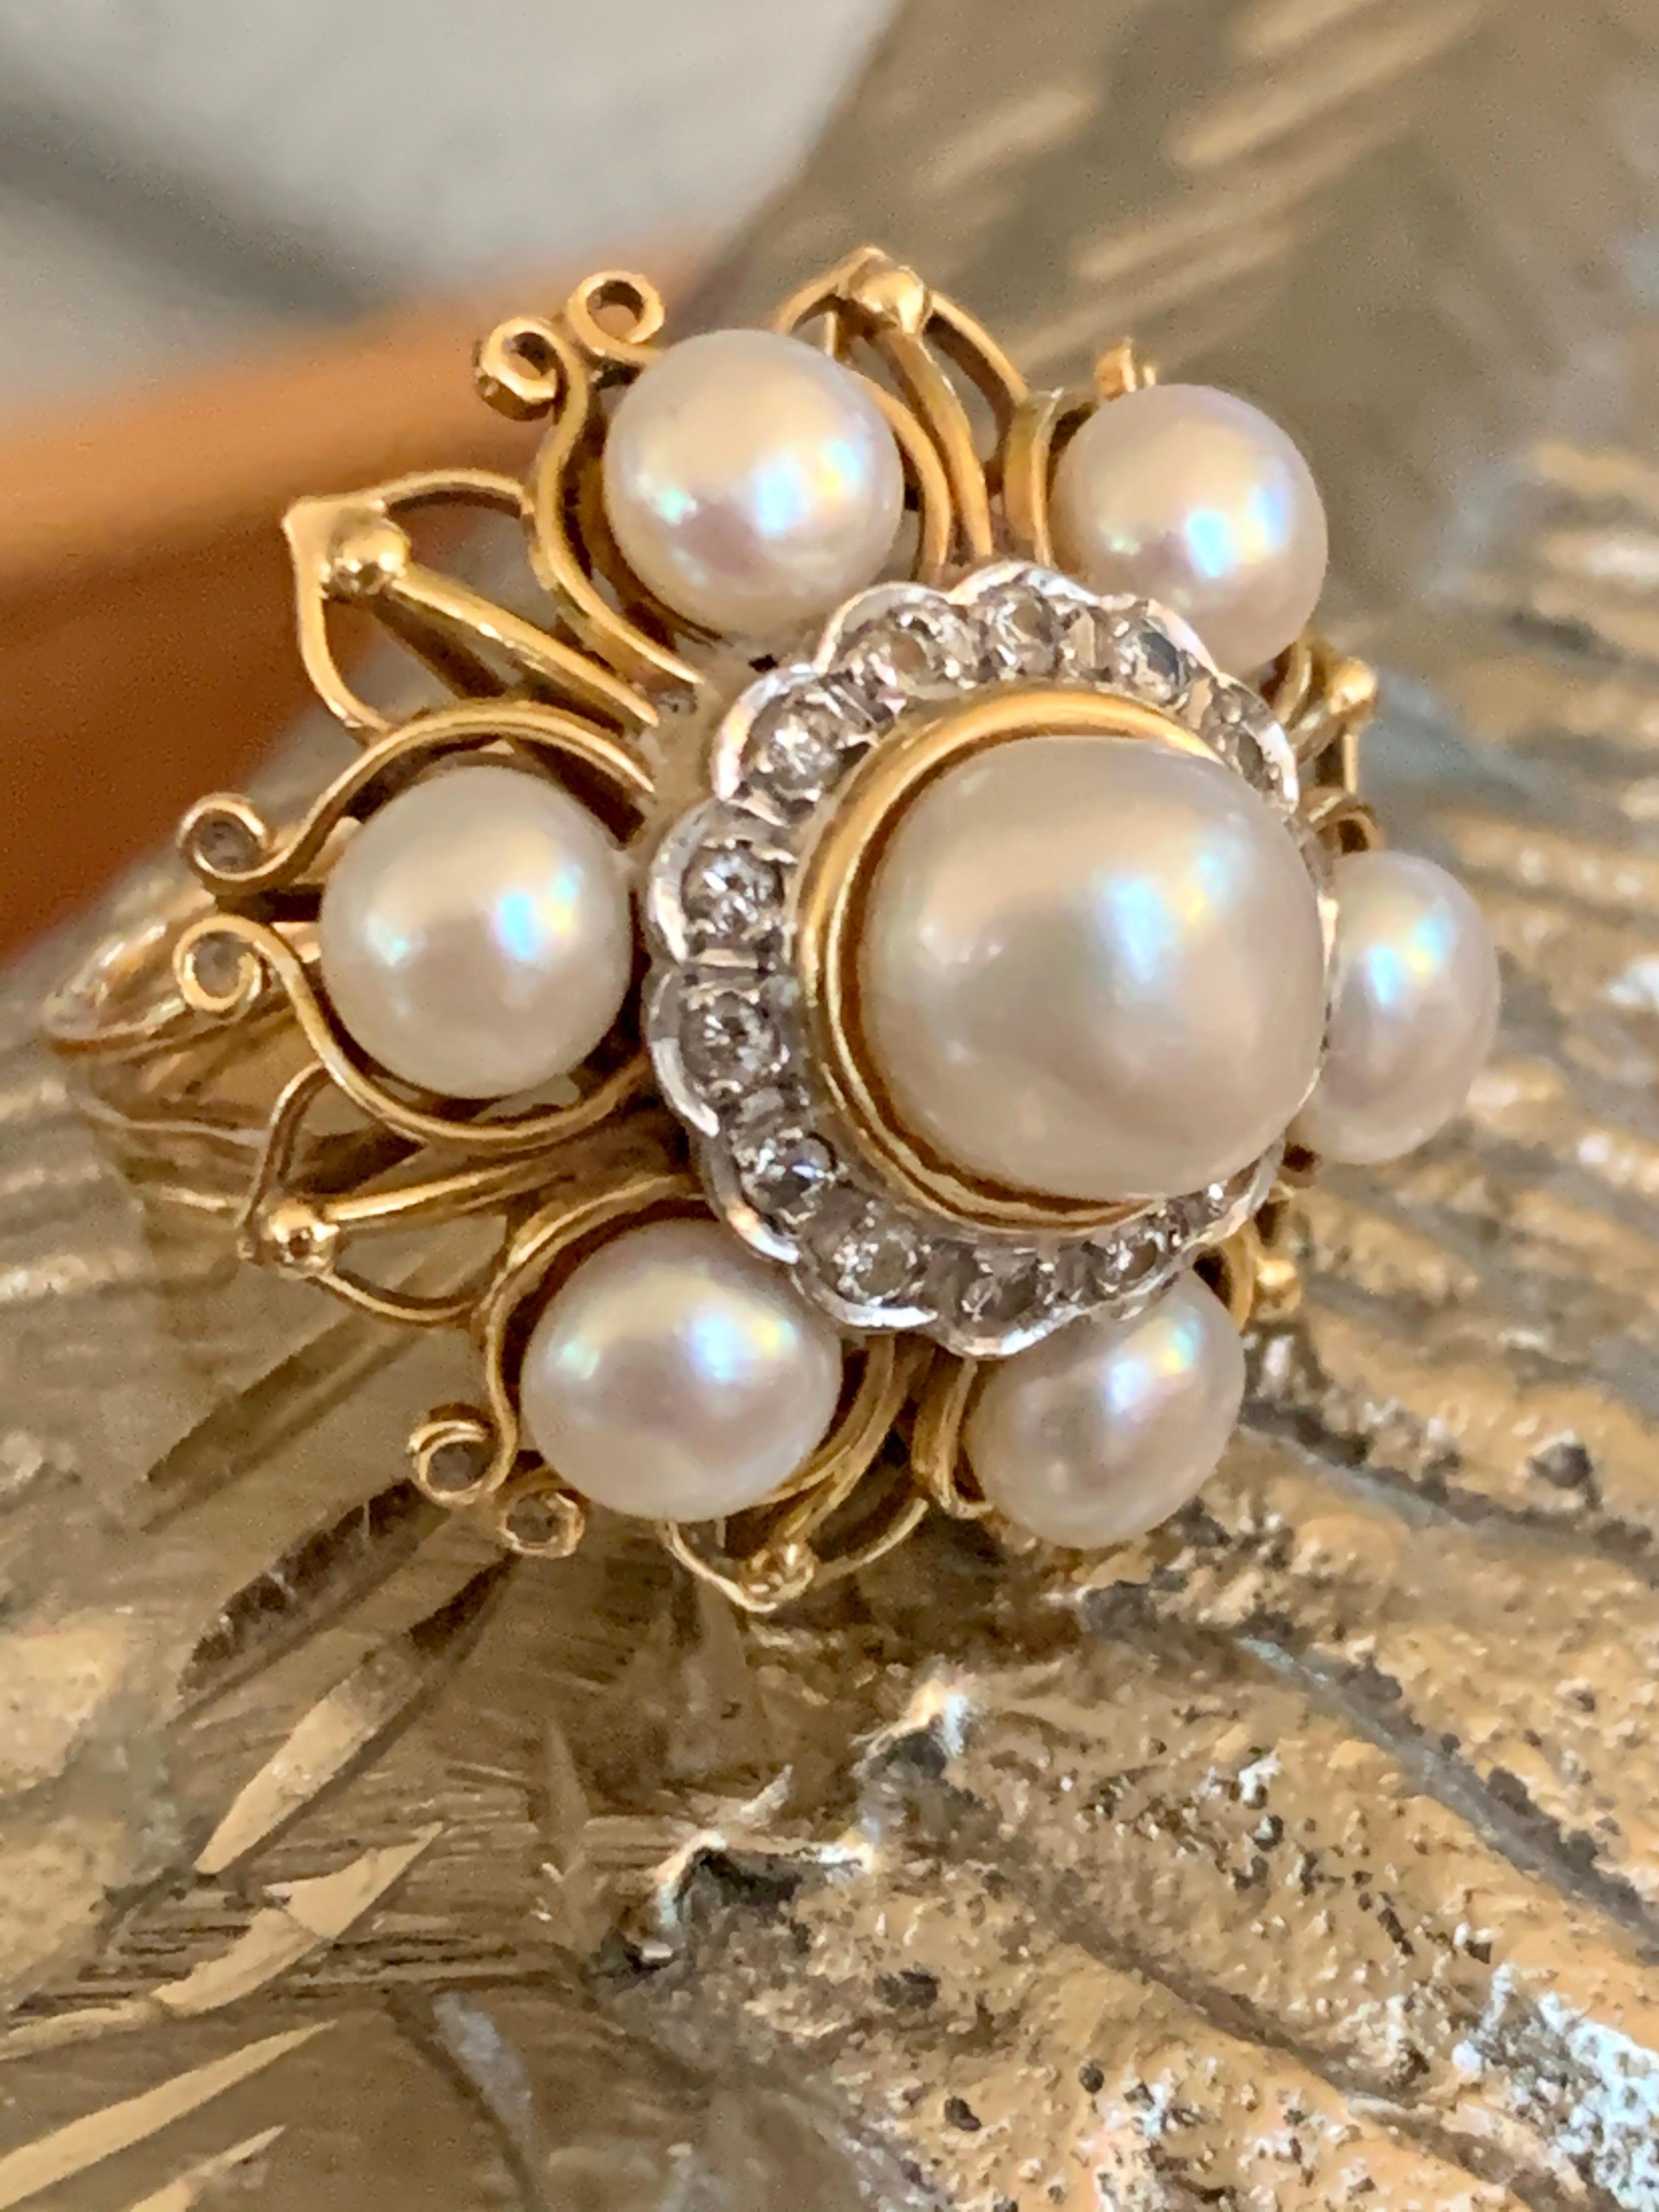 This amazing statement ring features 14-1.5mm brilliant cut Diamonds and seven cultured Pearls.  The Diamonds weigh .20ctw and have average grades of VS-G/H.

Size: 6 1/2 - this ring can be resized; G. Lindberg Jewels does not offer sizing services.